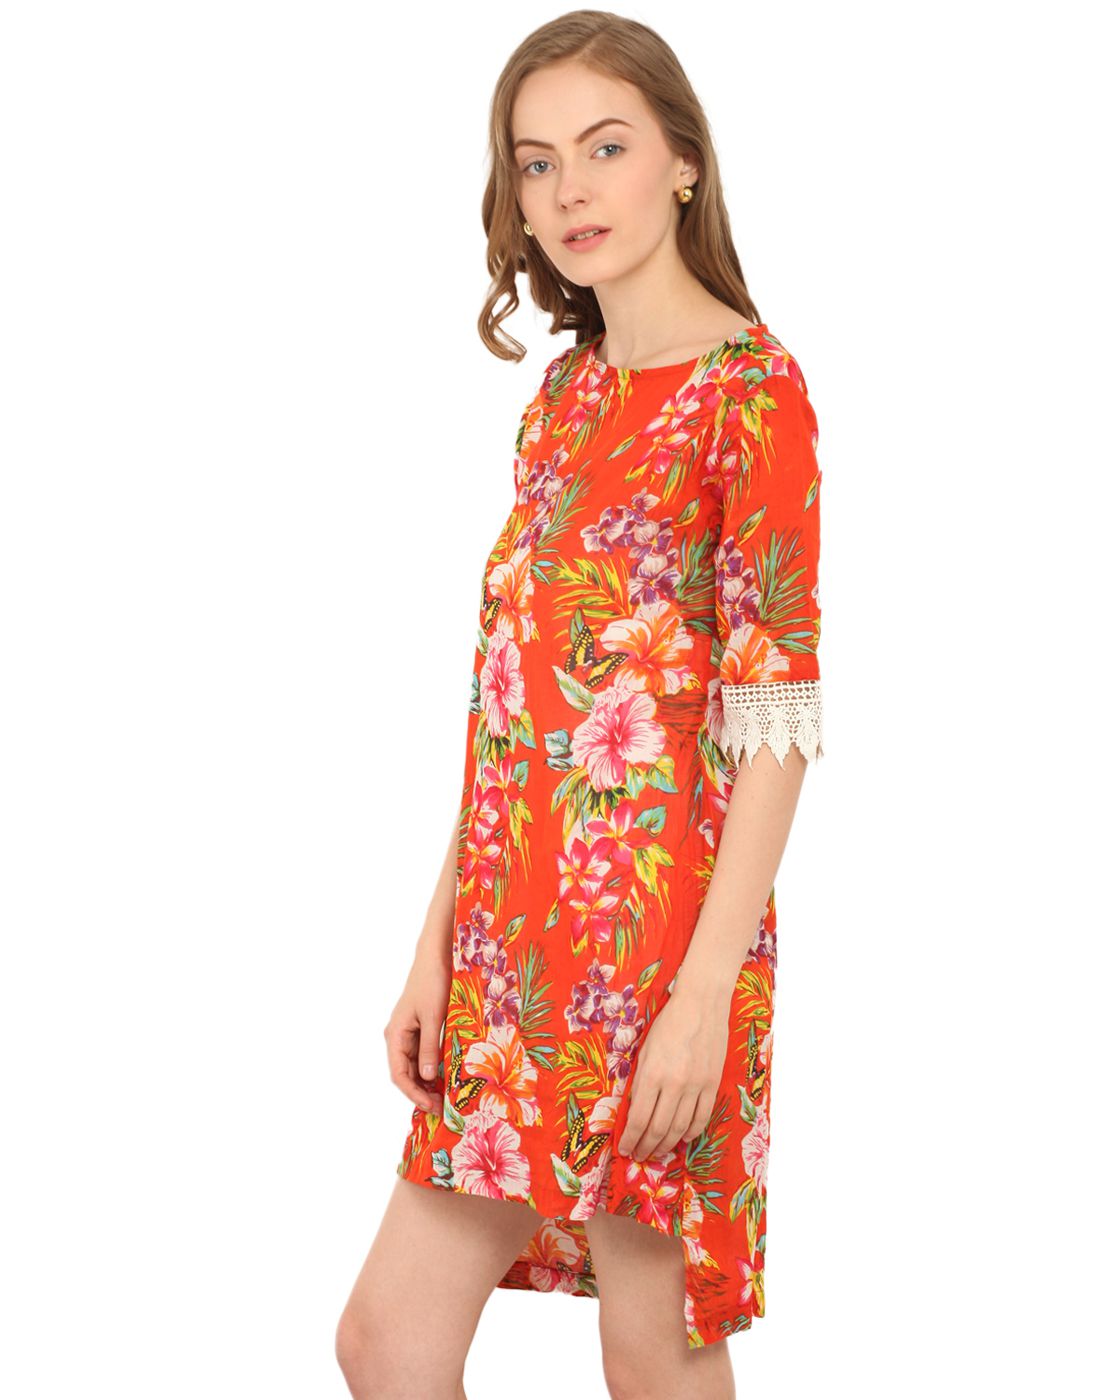 Blink Cotton Dresses - Buy Blink Cotton Dresses Online at Best Prices ...